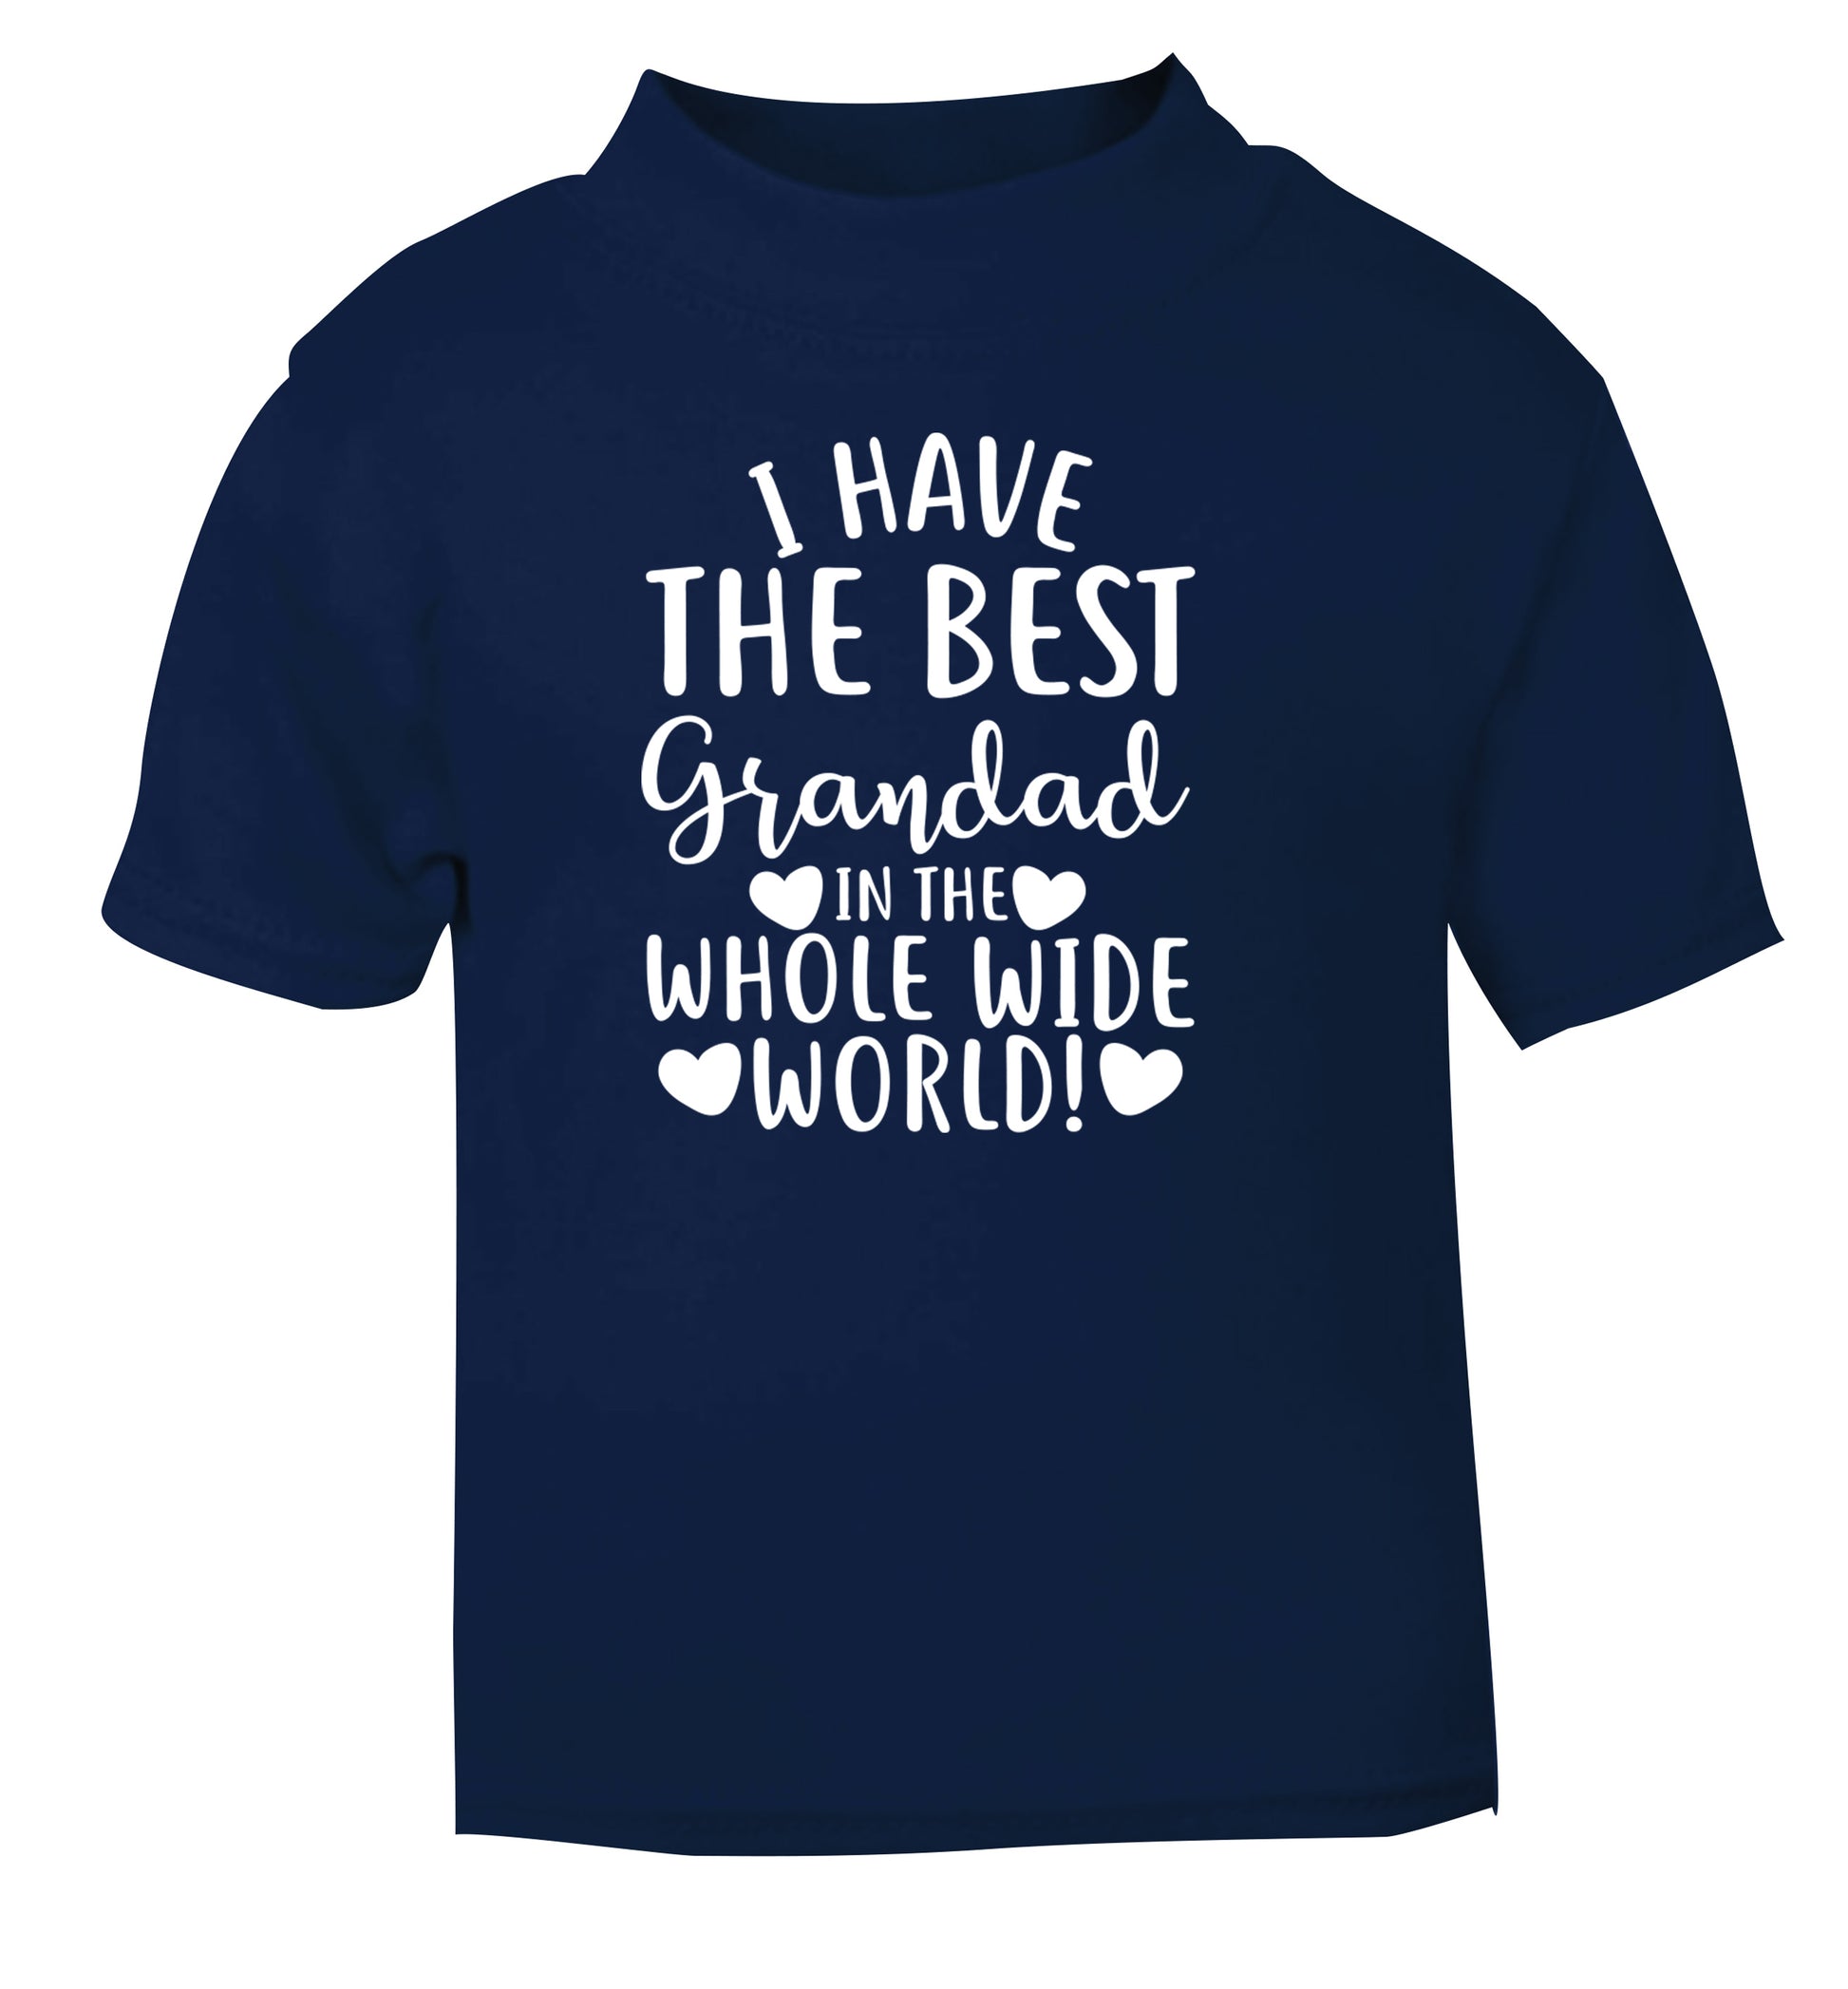 I have the best grandad in the whole wide world! navy Baby Toddler Tshirt 2 Years